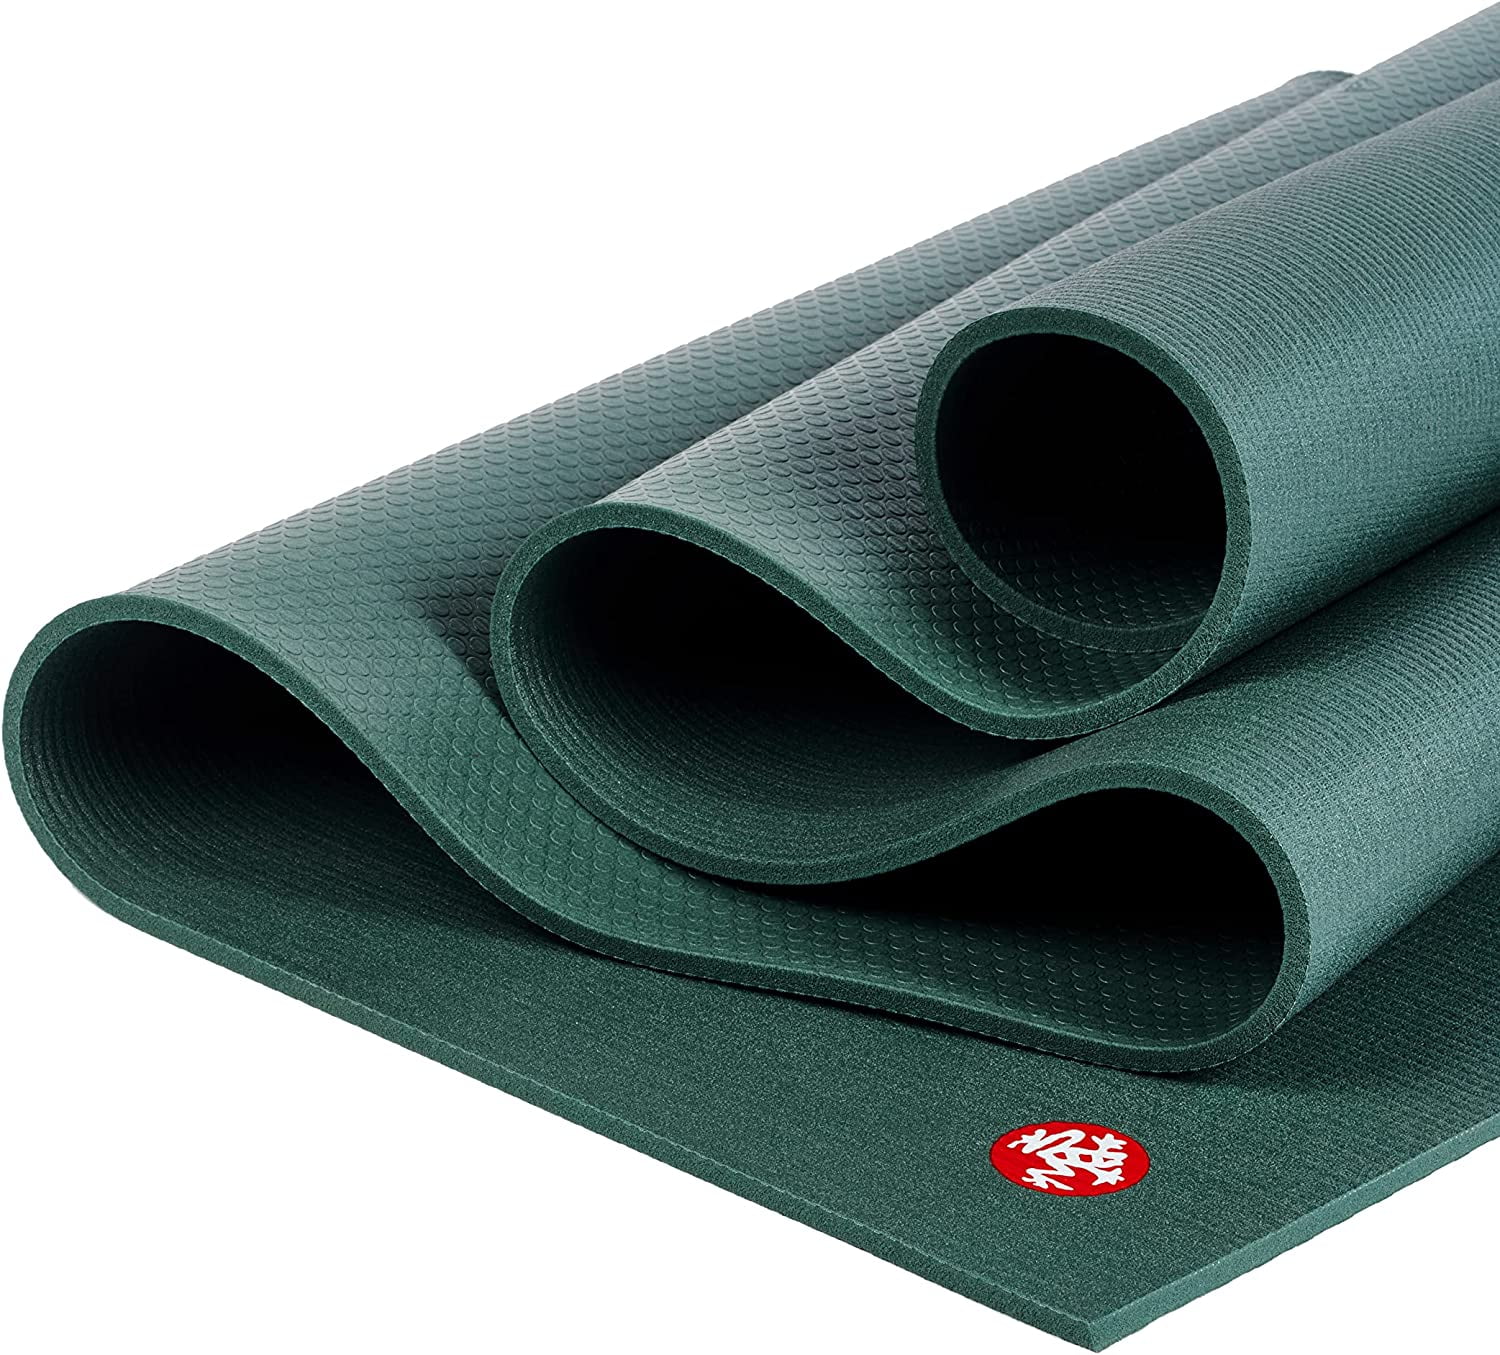 YOGA SOUL CAKE Black Pilates Mat Pad ,10mm Thickness, Ideal for